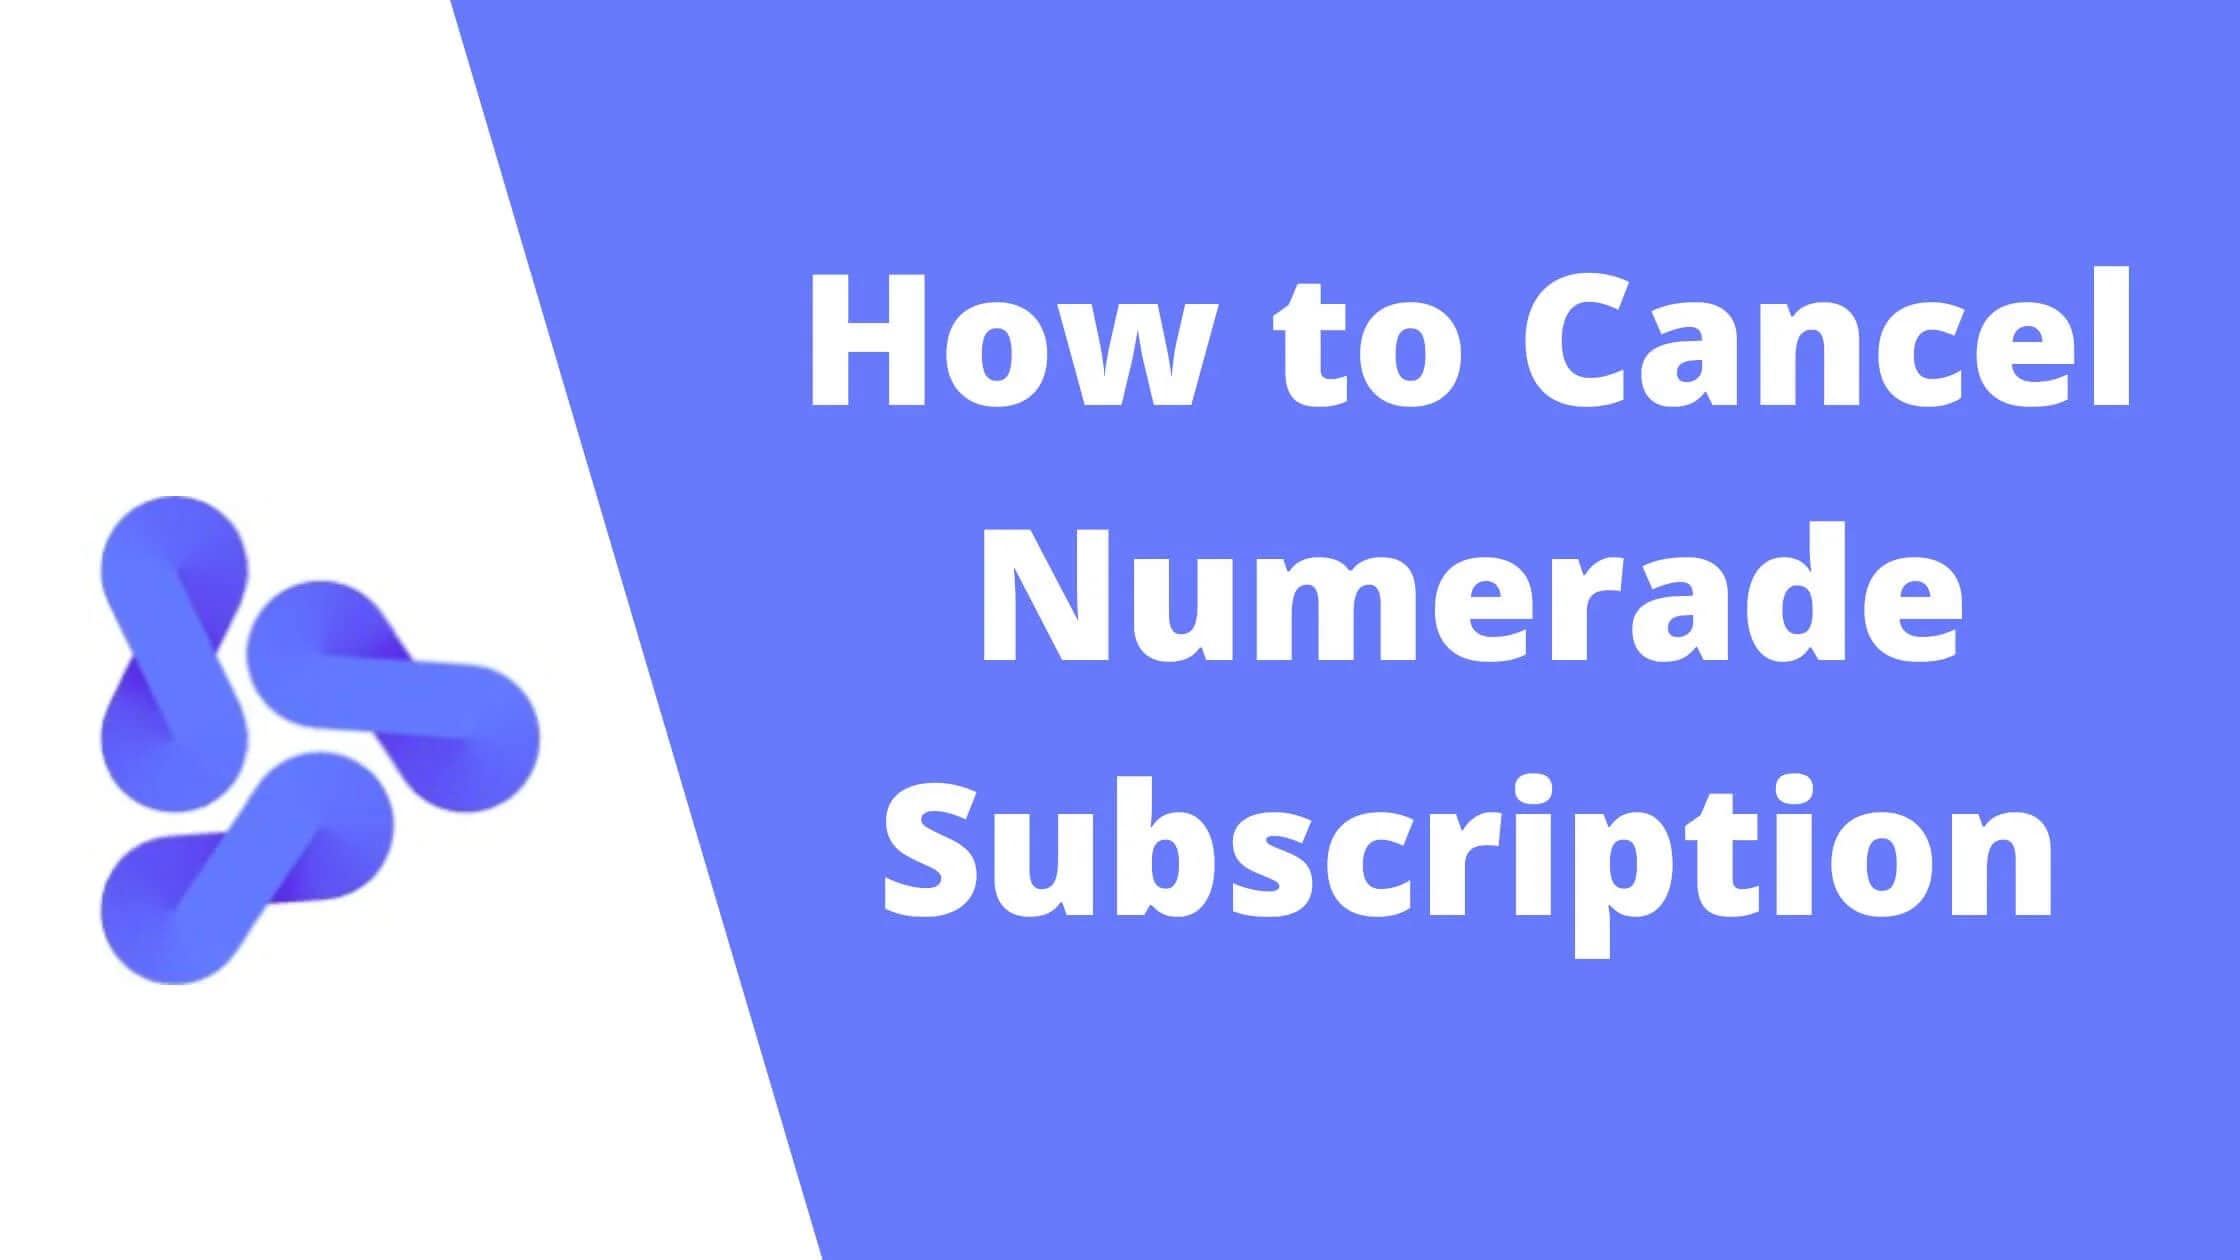 How To Cancel Numerade Subscription?